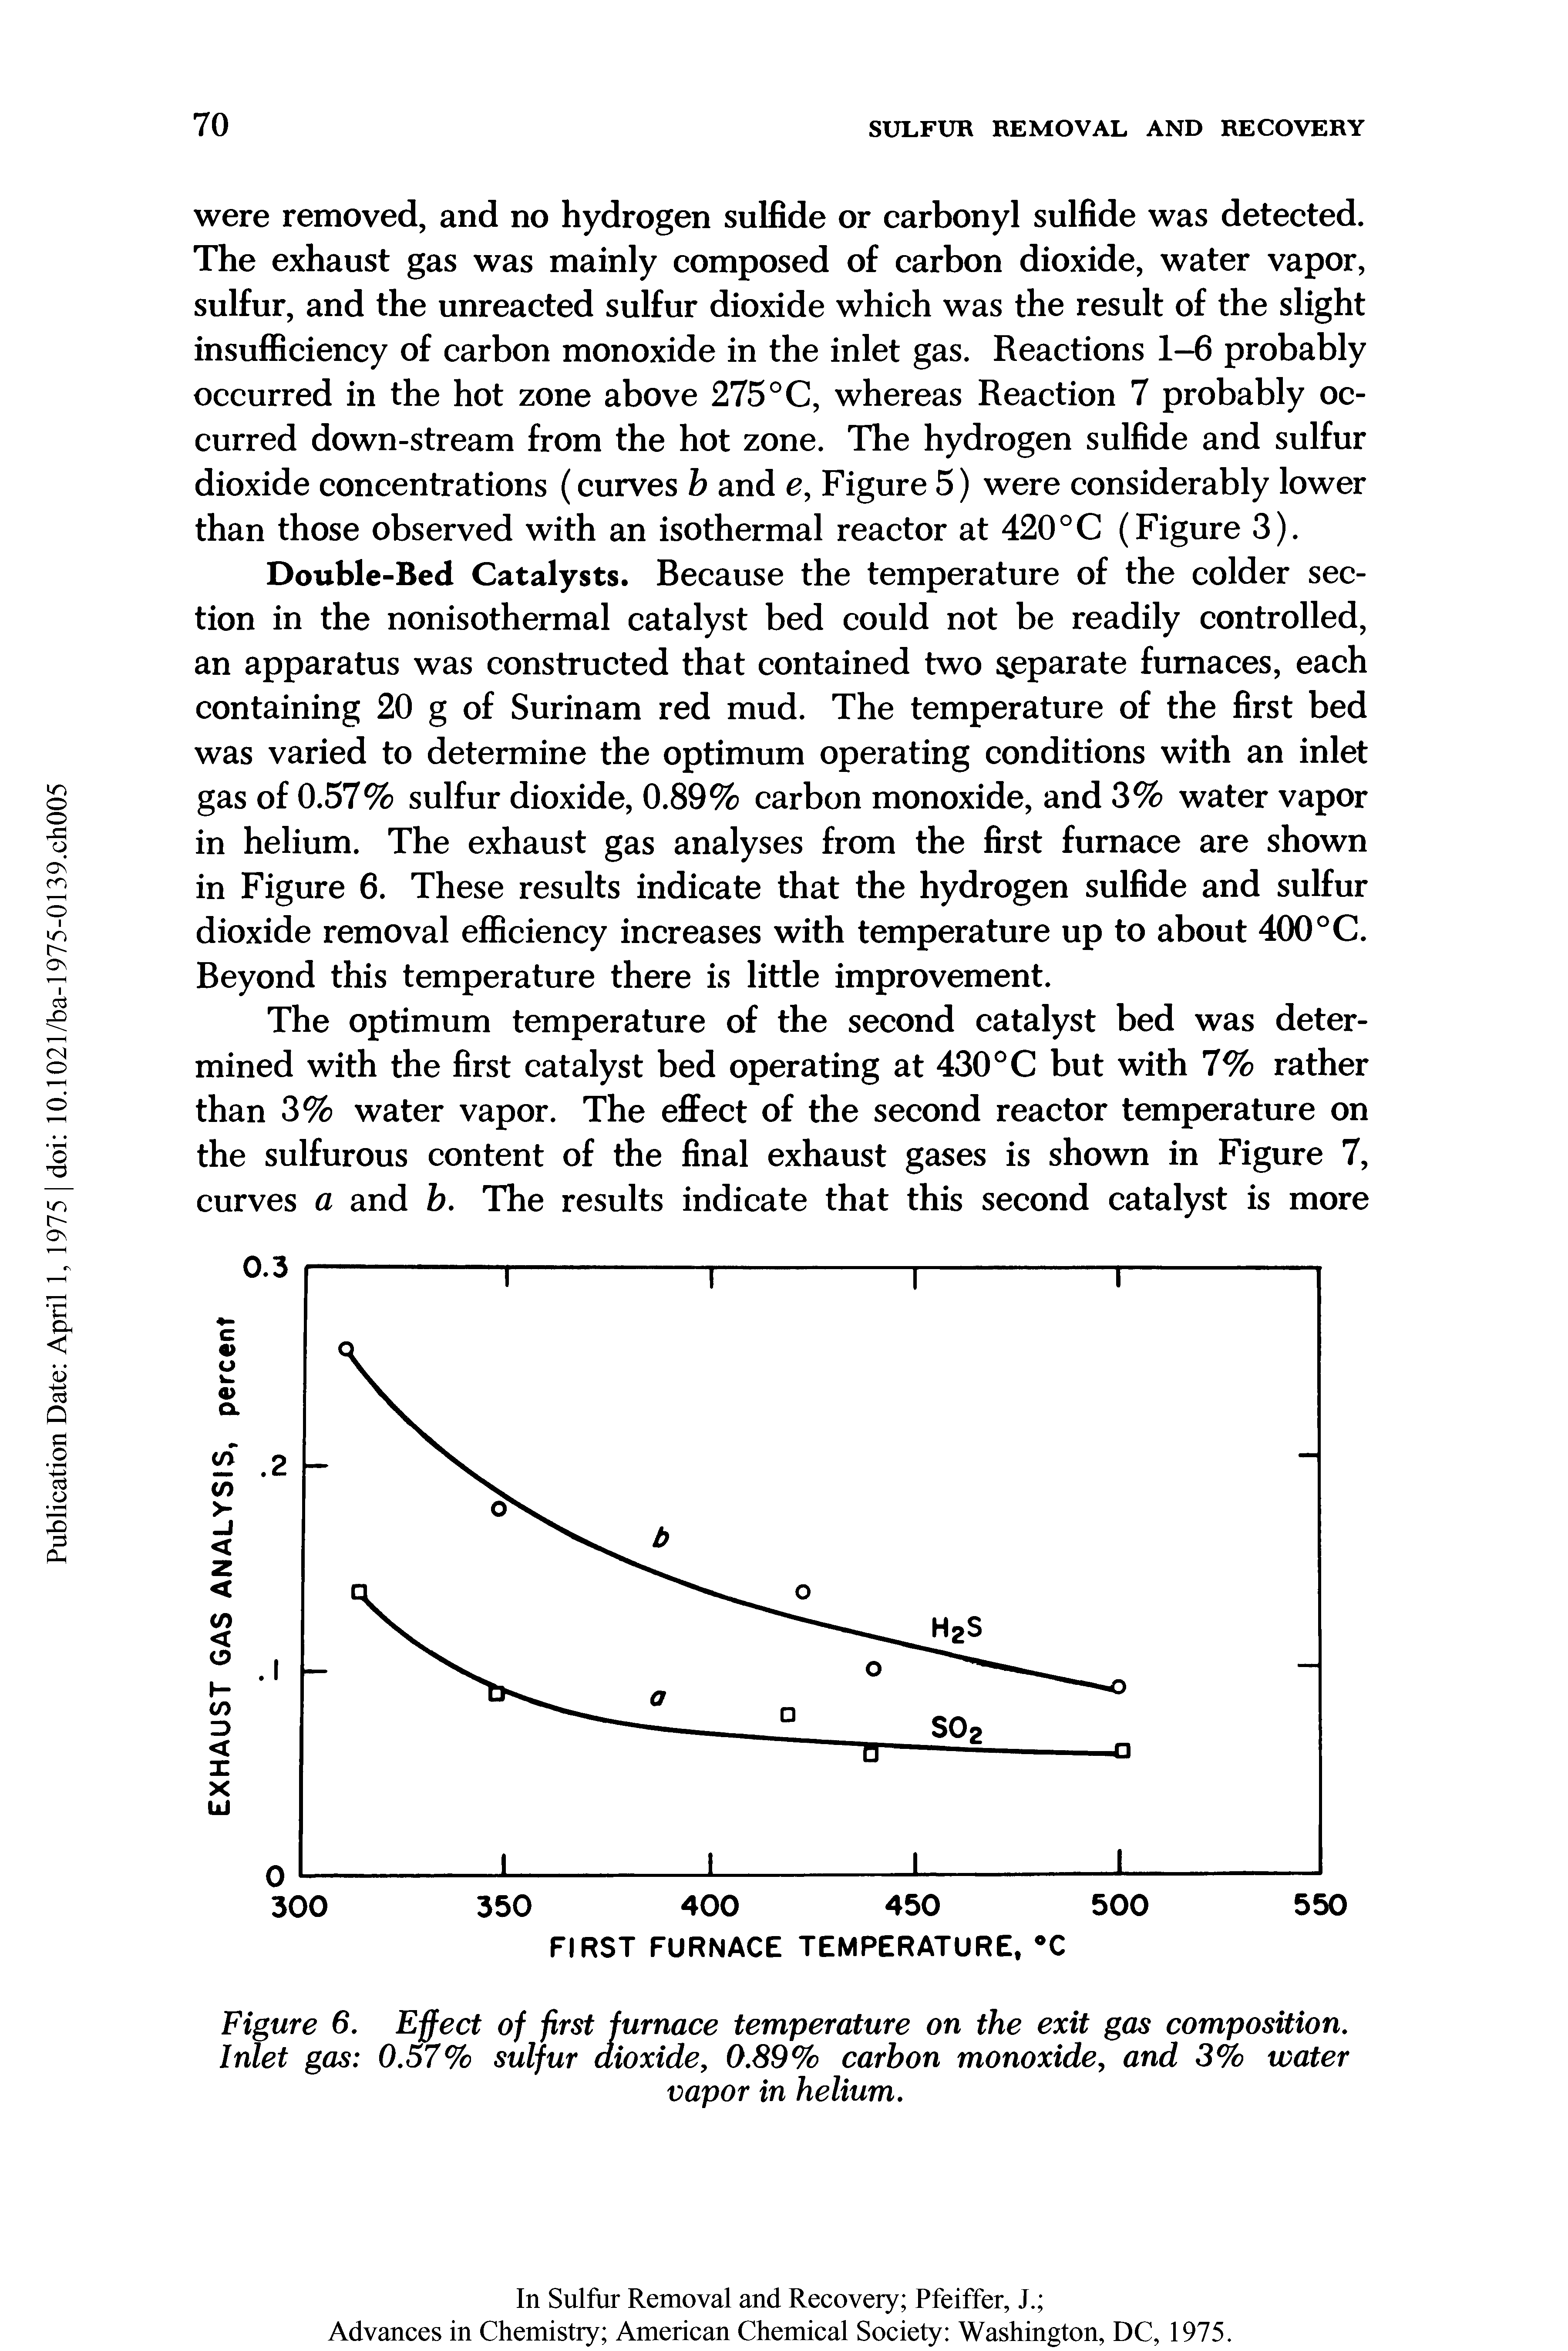 Figure 6. Effect of first furnace temperature on the exit gas composition. Inlet gas 0.57% sulfur dioxide, 0.89% carbon monoxide, and 3% water...